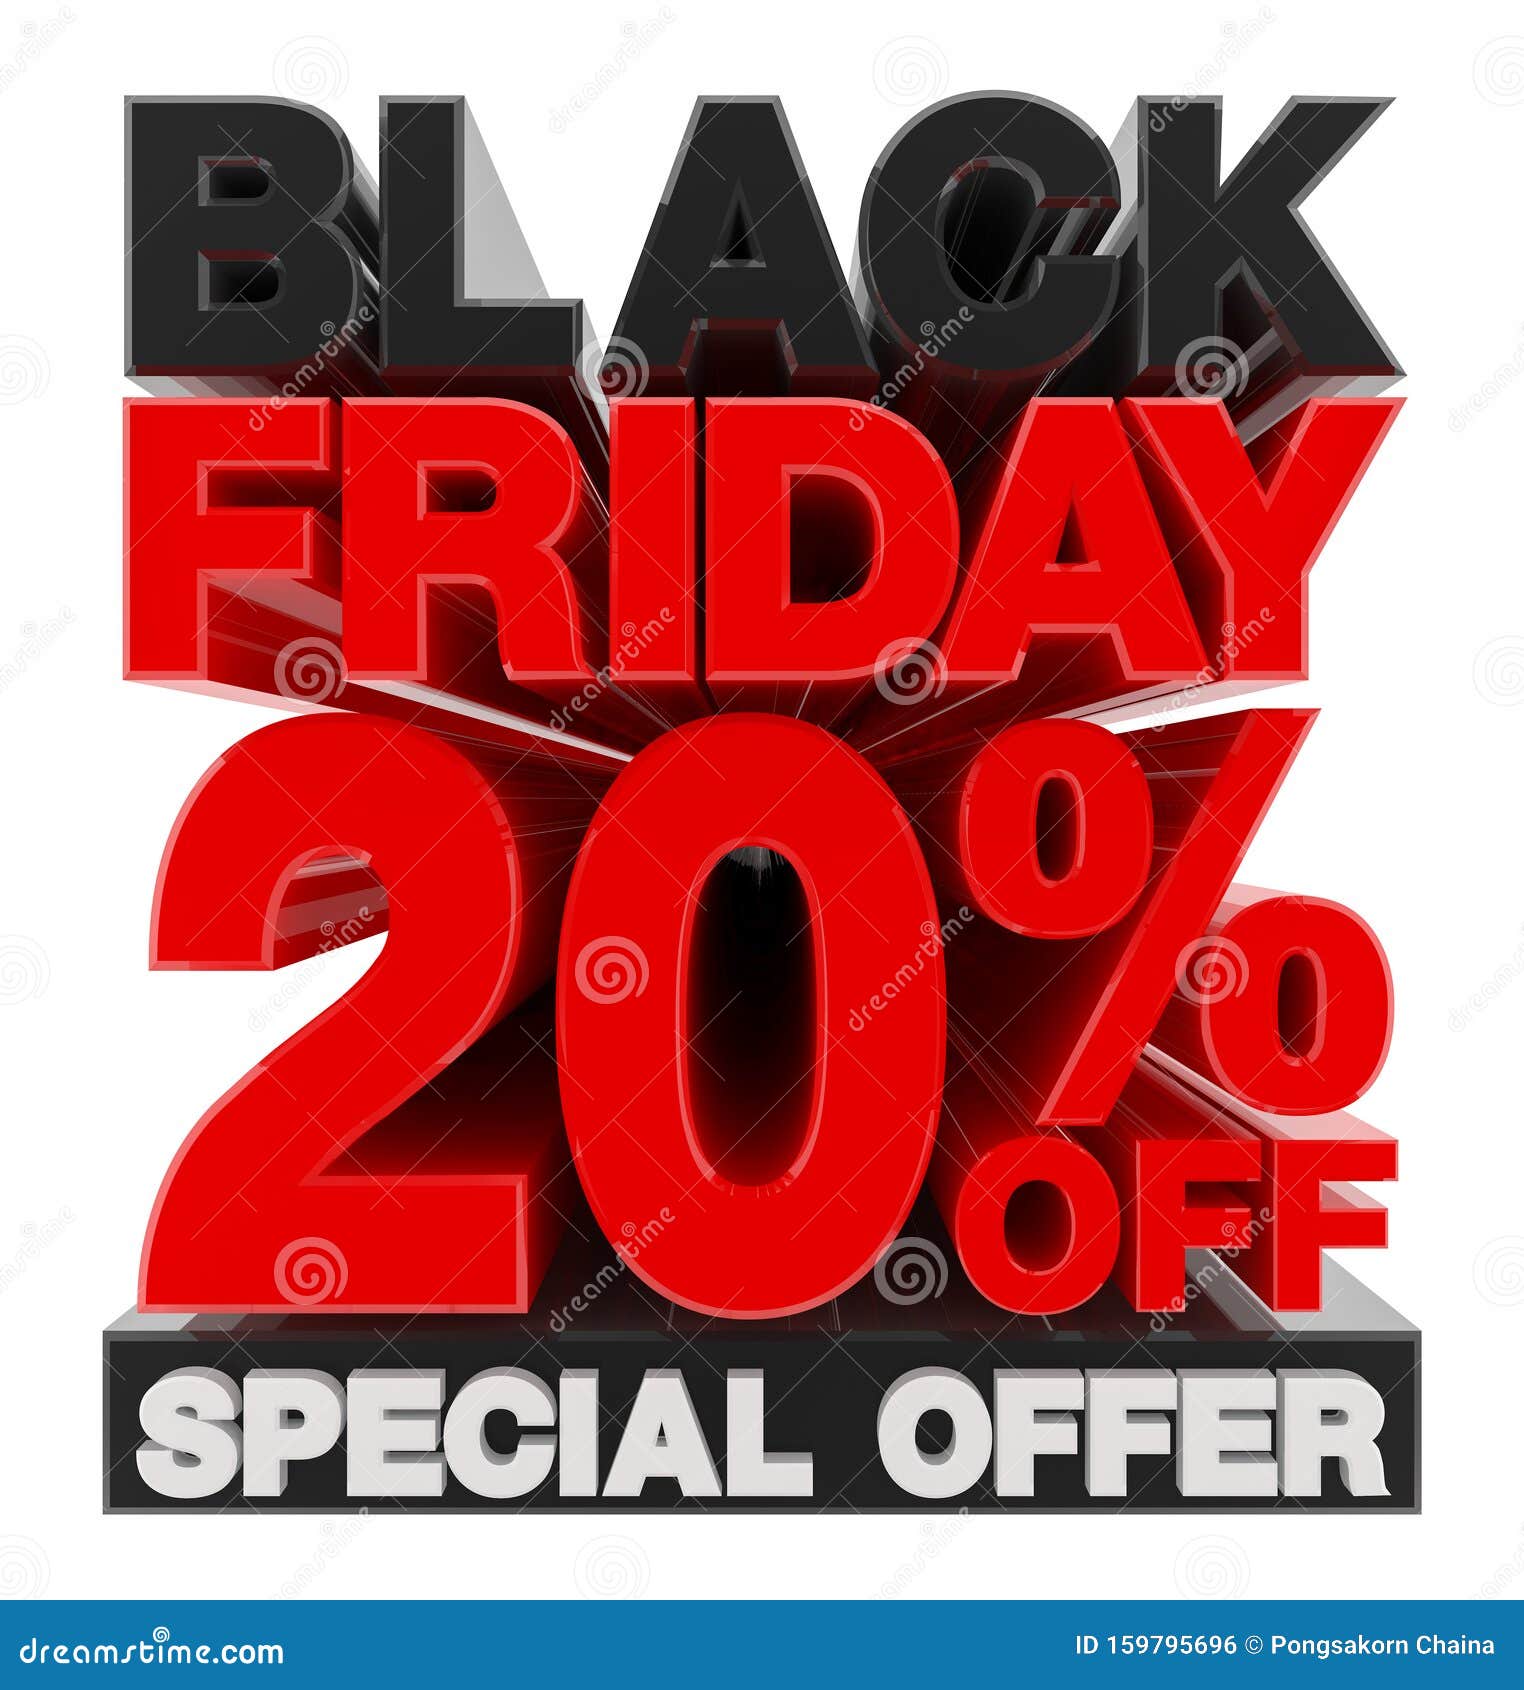 BLACK FRIDAY SALE 20 OFF SPECIAL OFFER Word on White Background